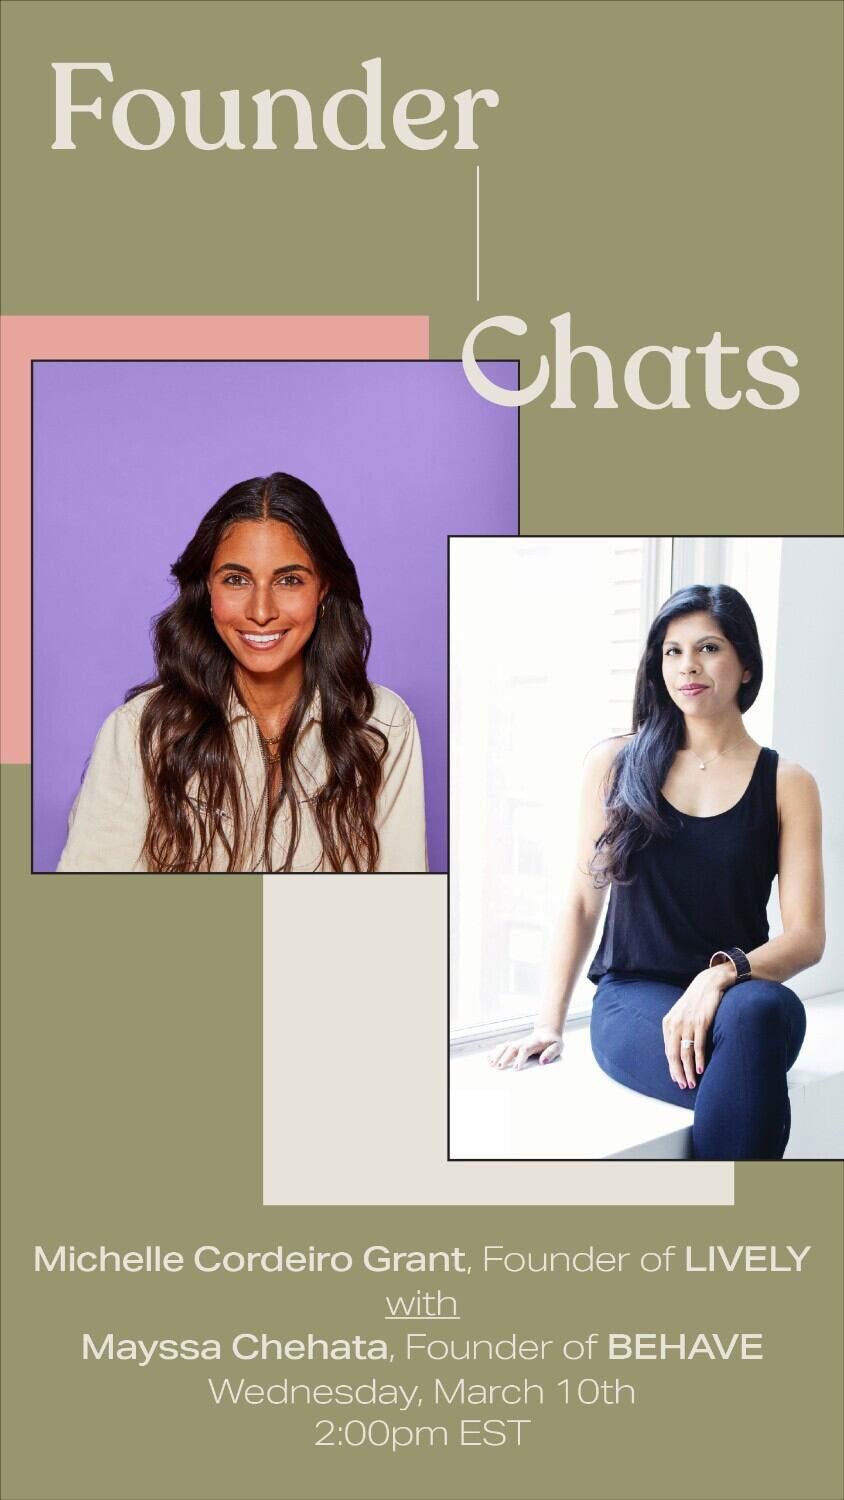 Founder Chats with Mayssa Chehata